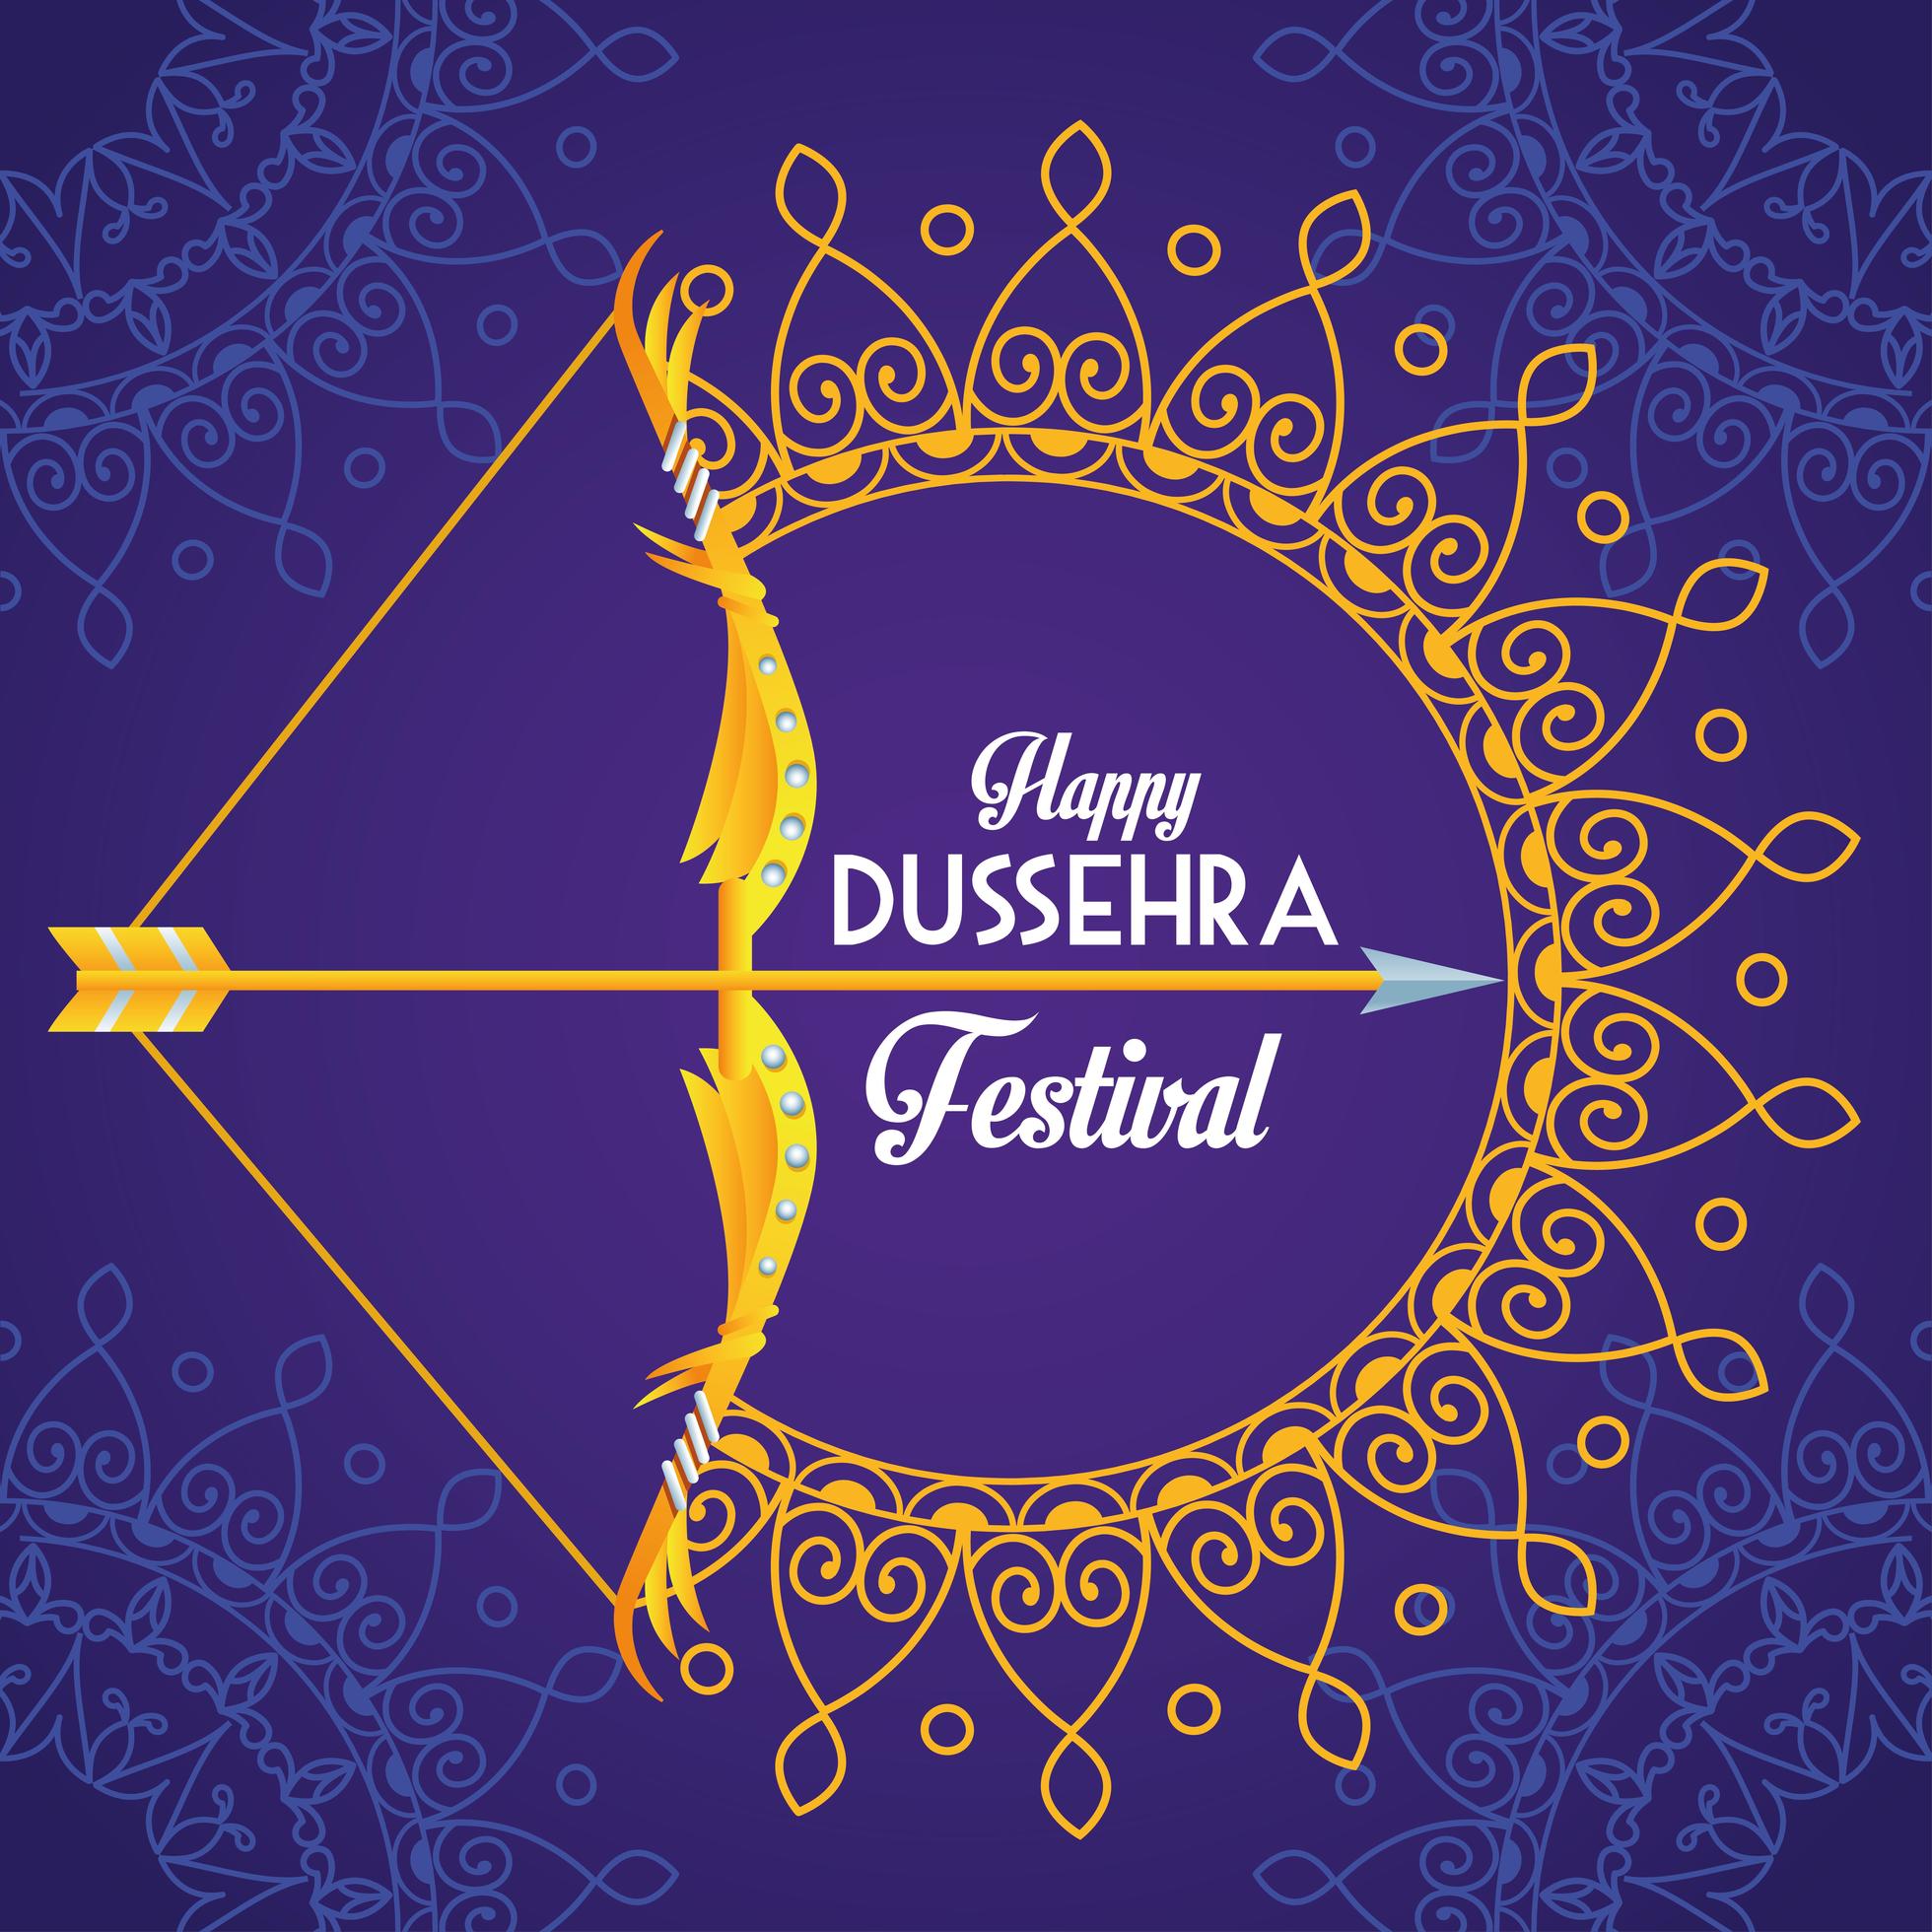 happy dussehra festival poster with arch and mandalas in purple